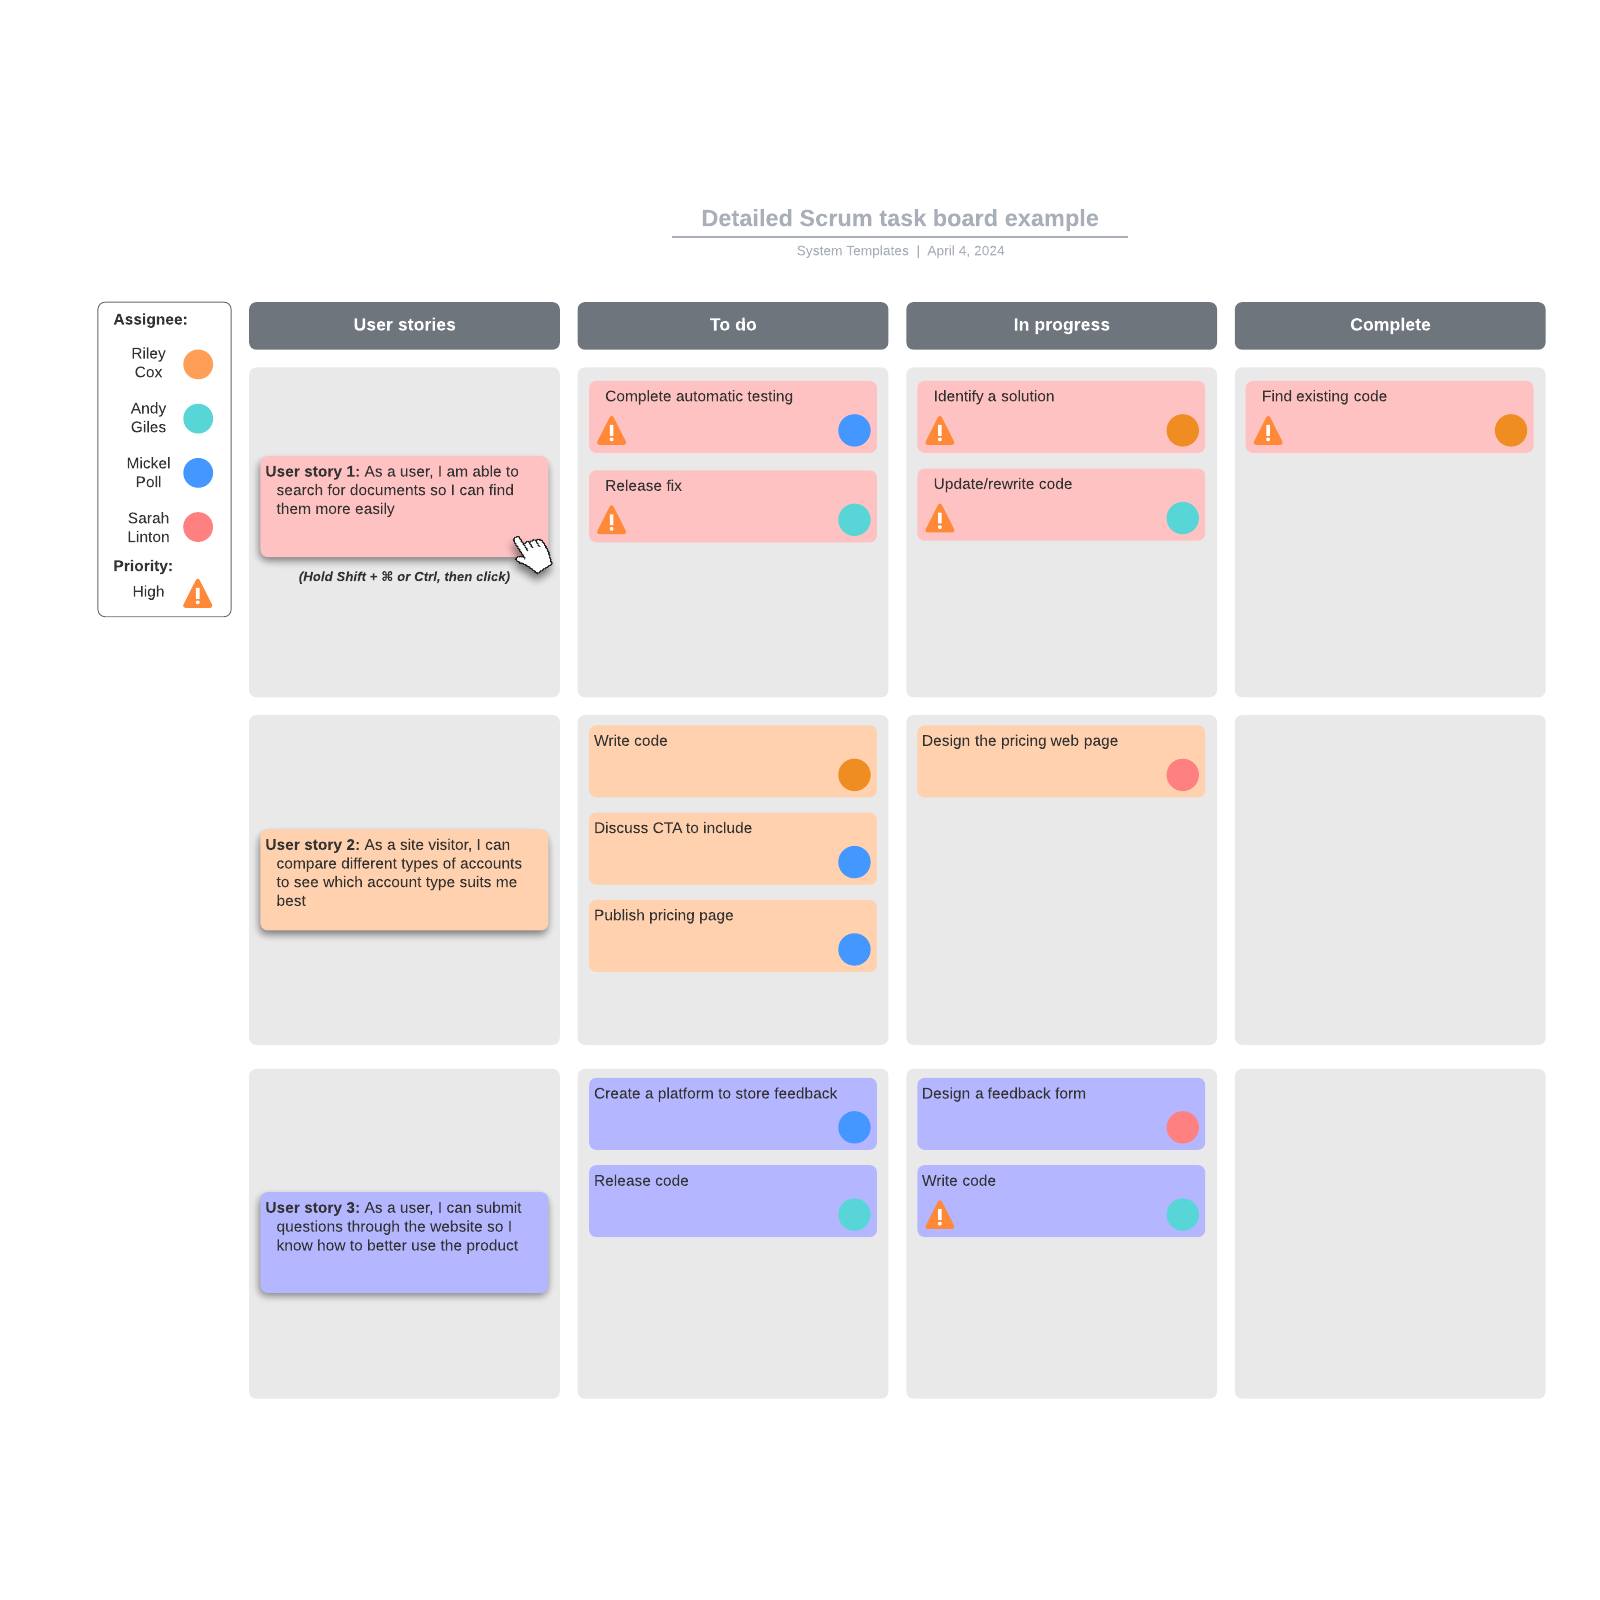 Detailed Scrum task board example example